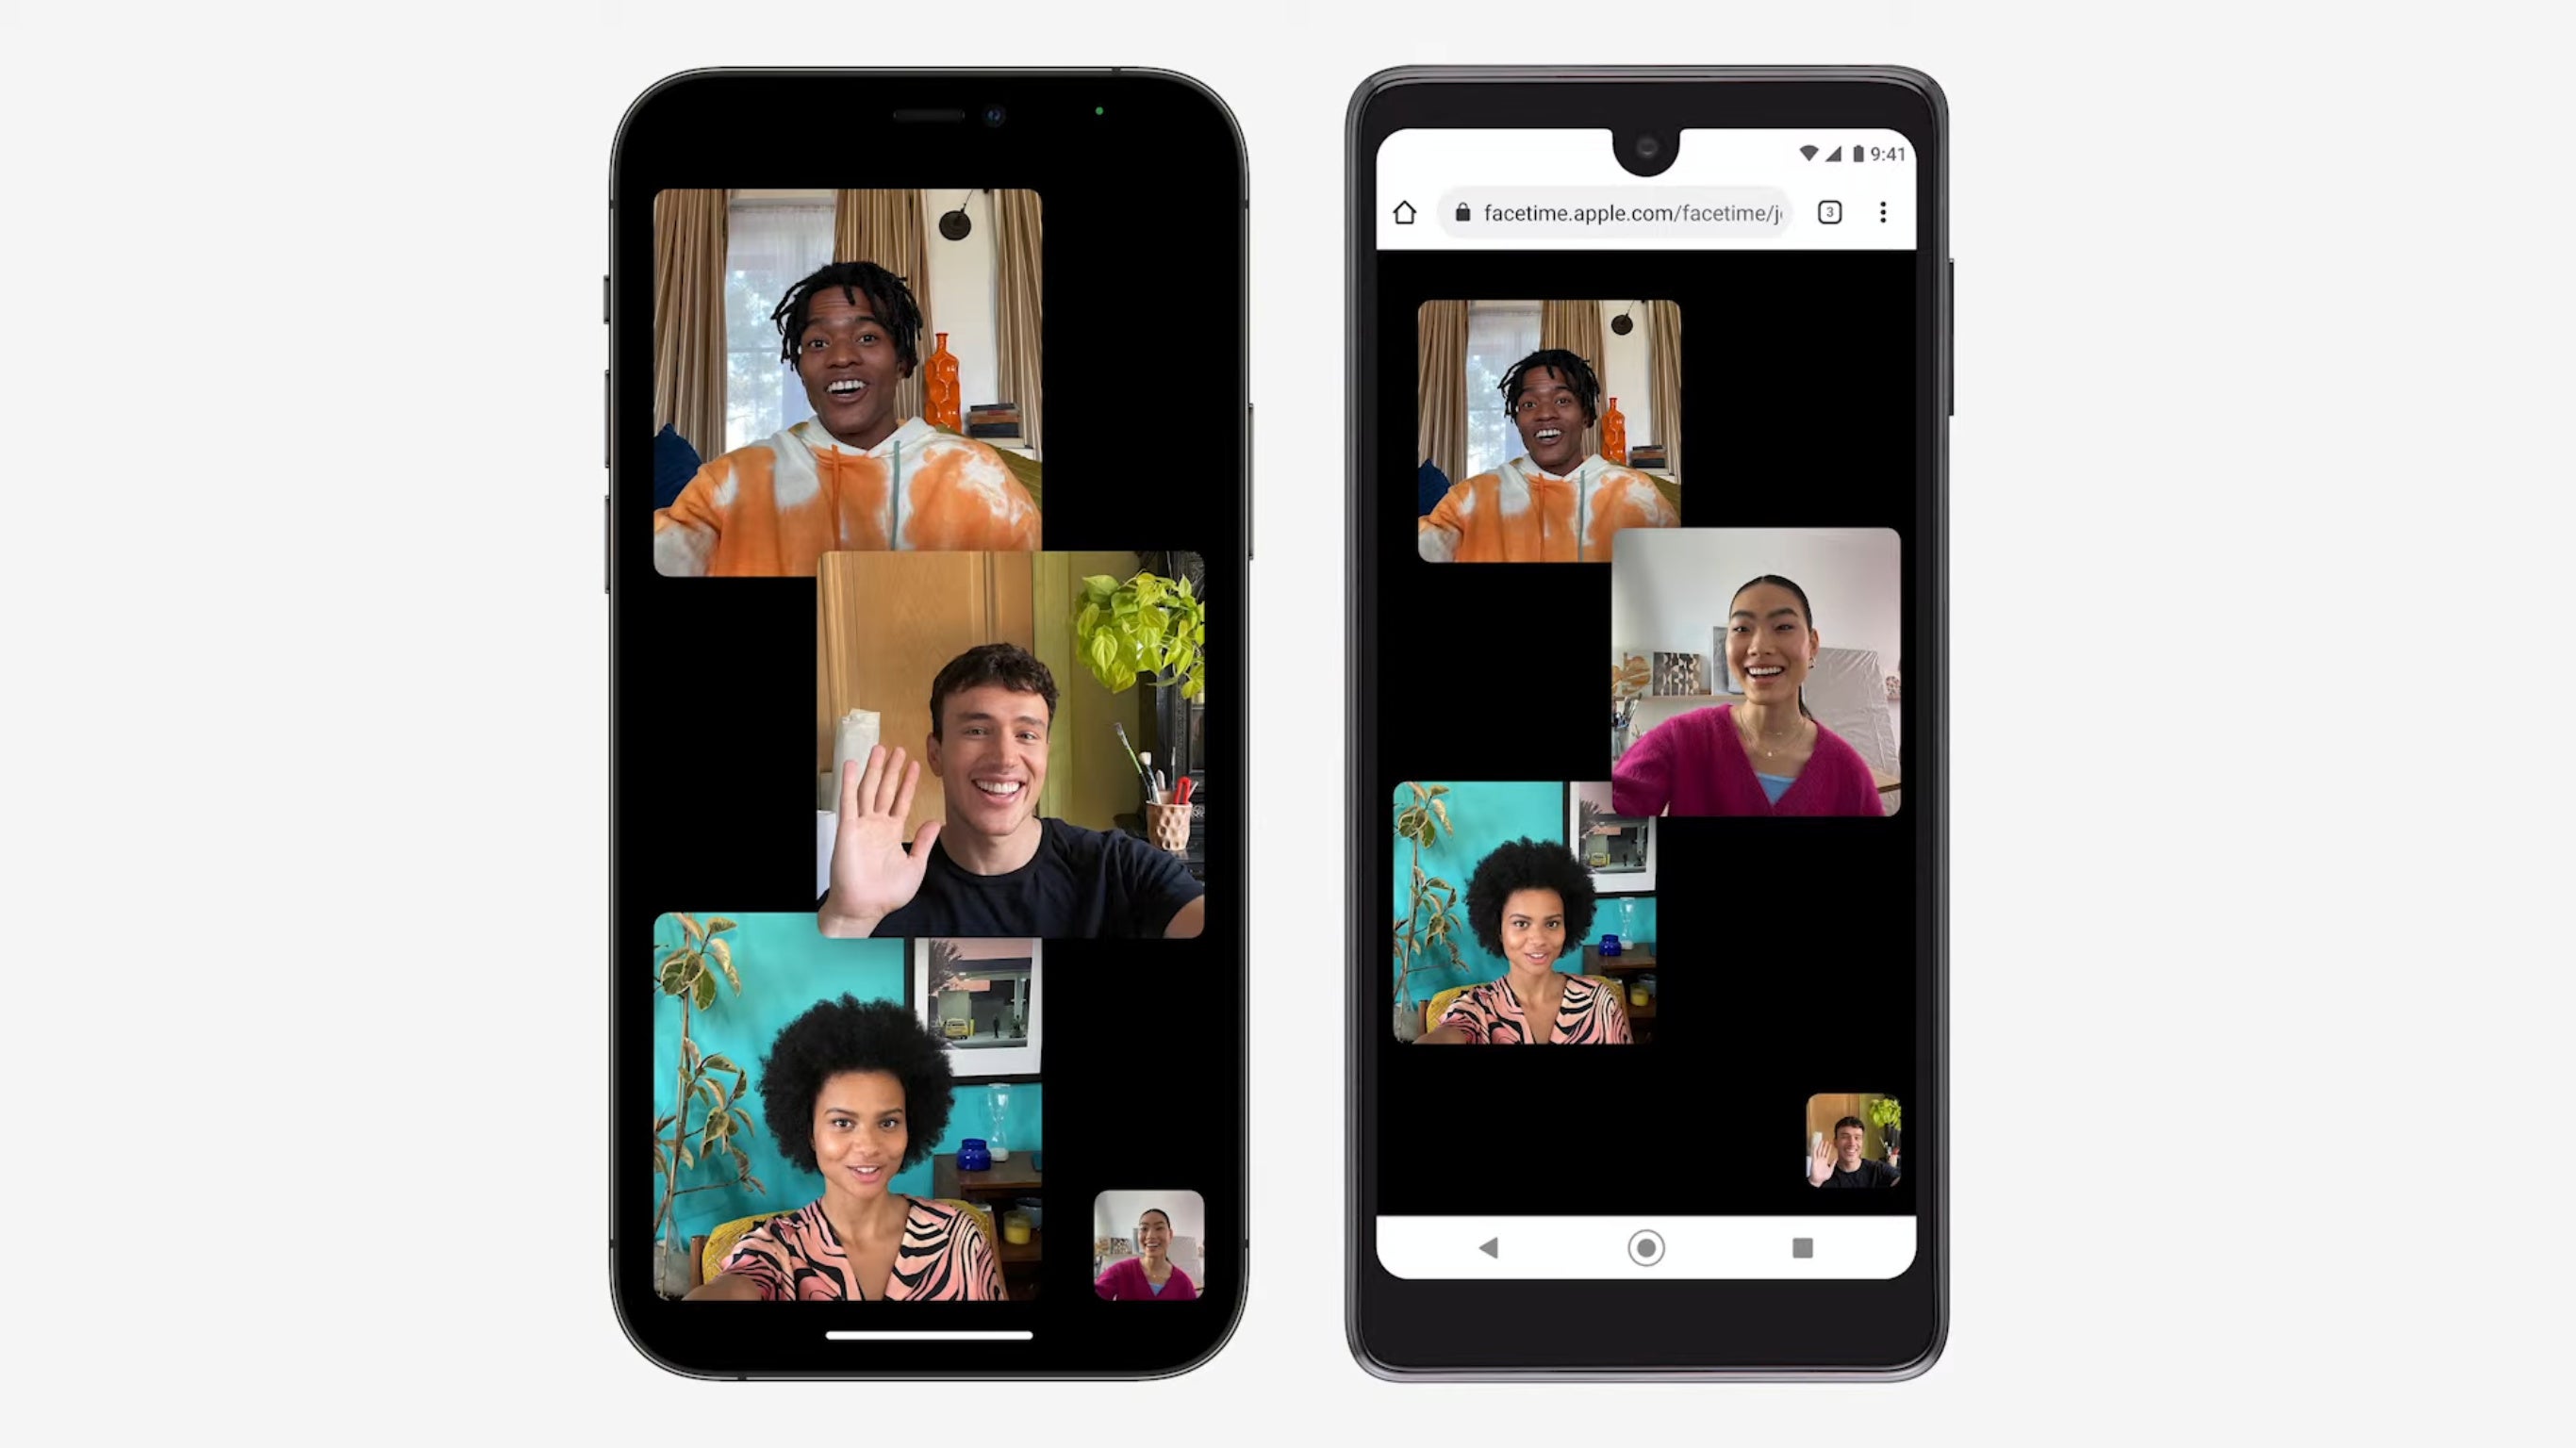 FaceTime across devices - FaceTime gets tons of new features with iOS 15. Android users can join FaceTime calls